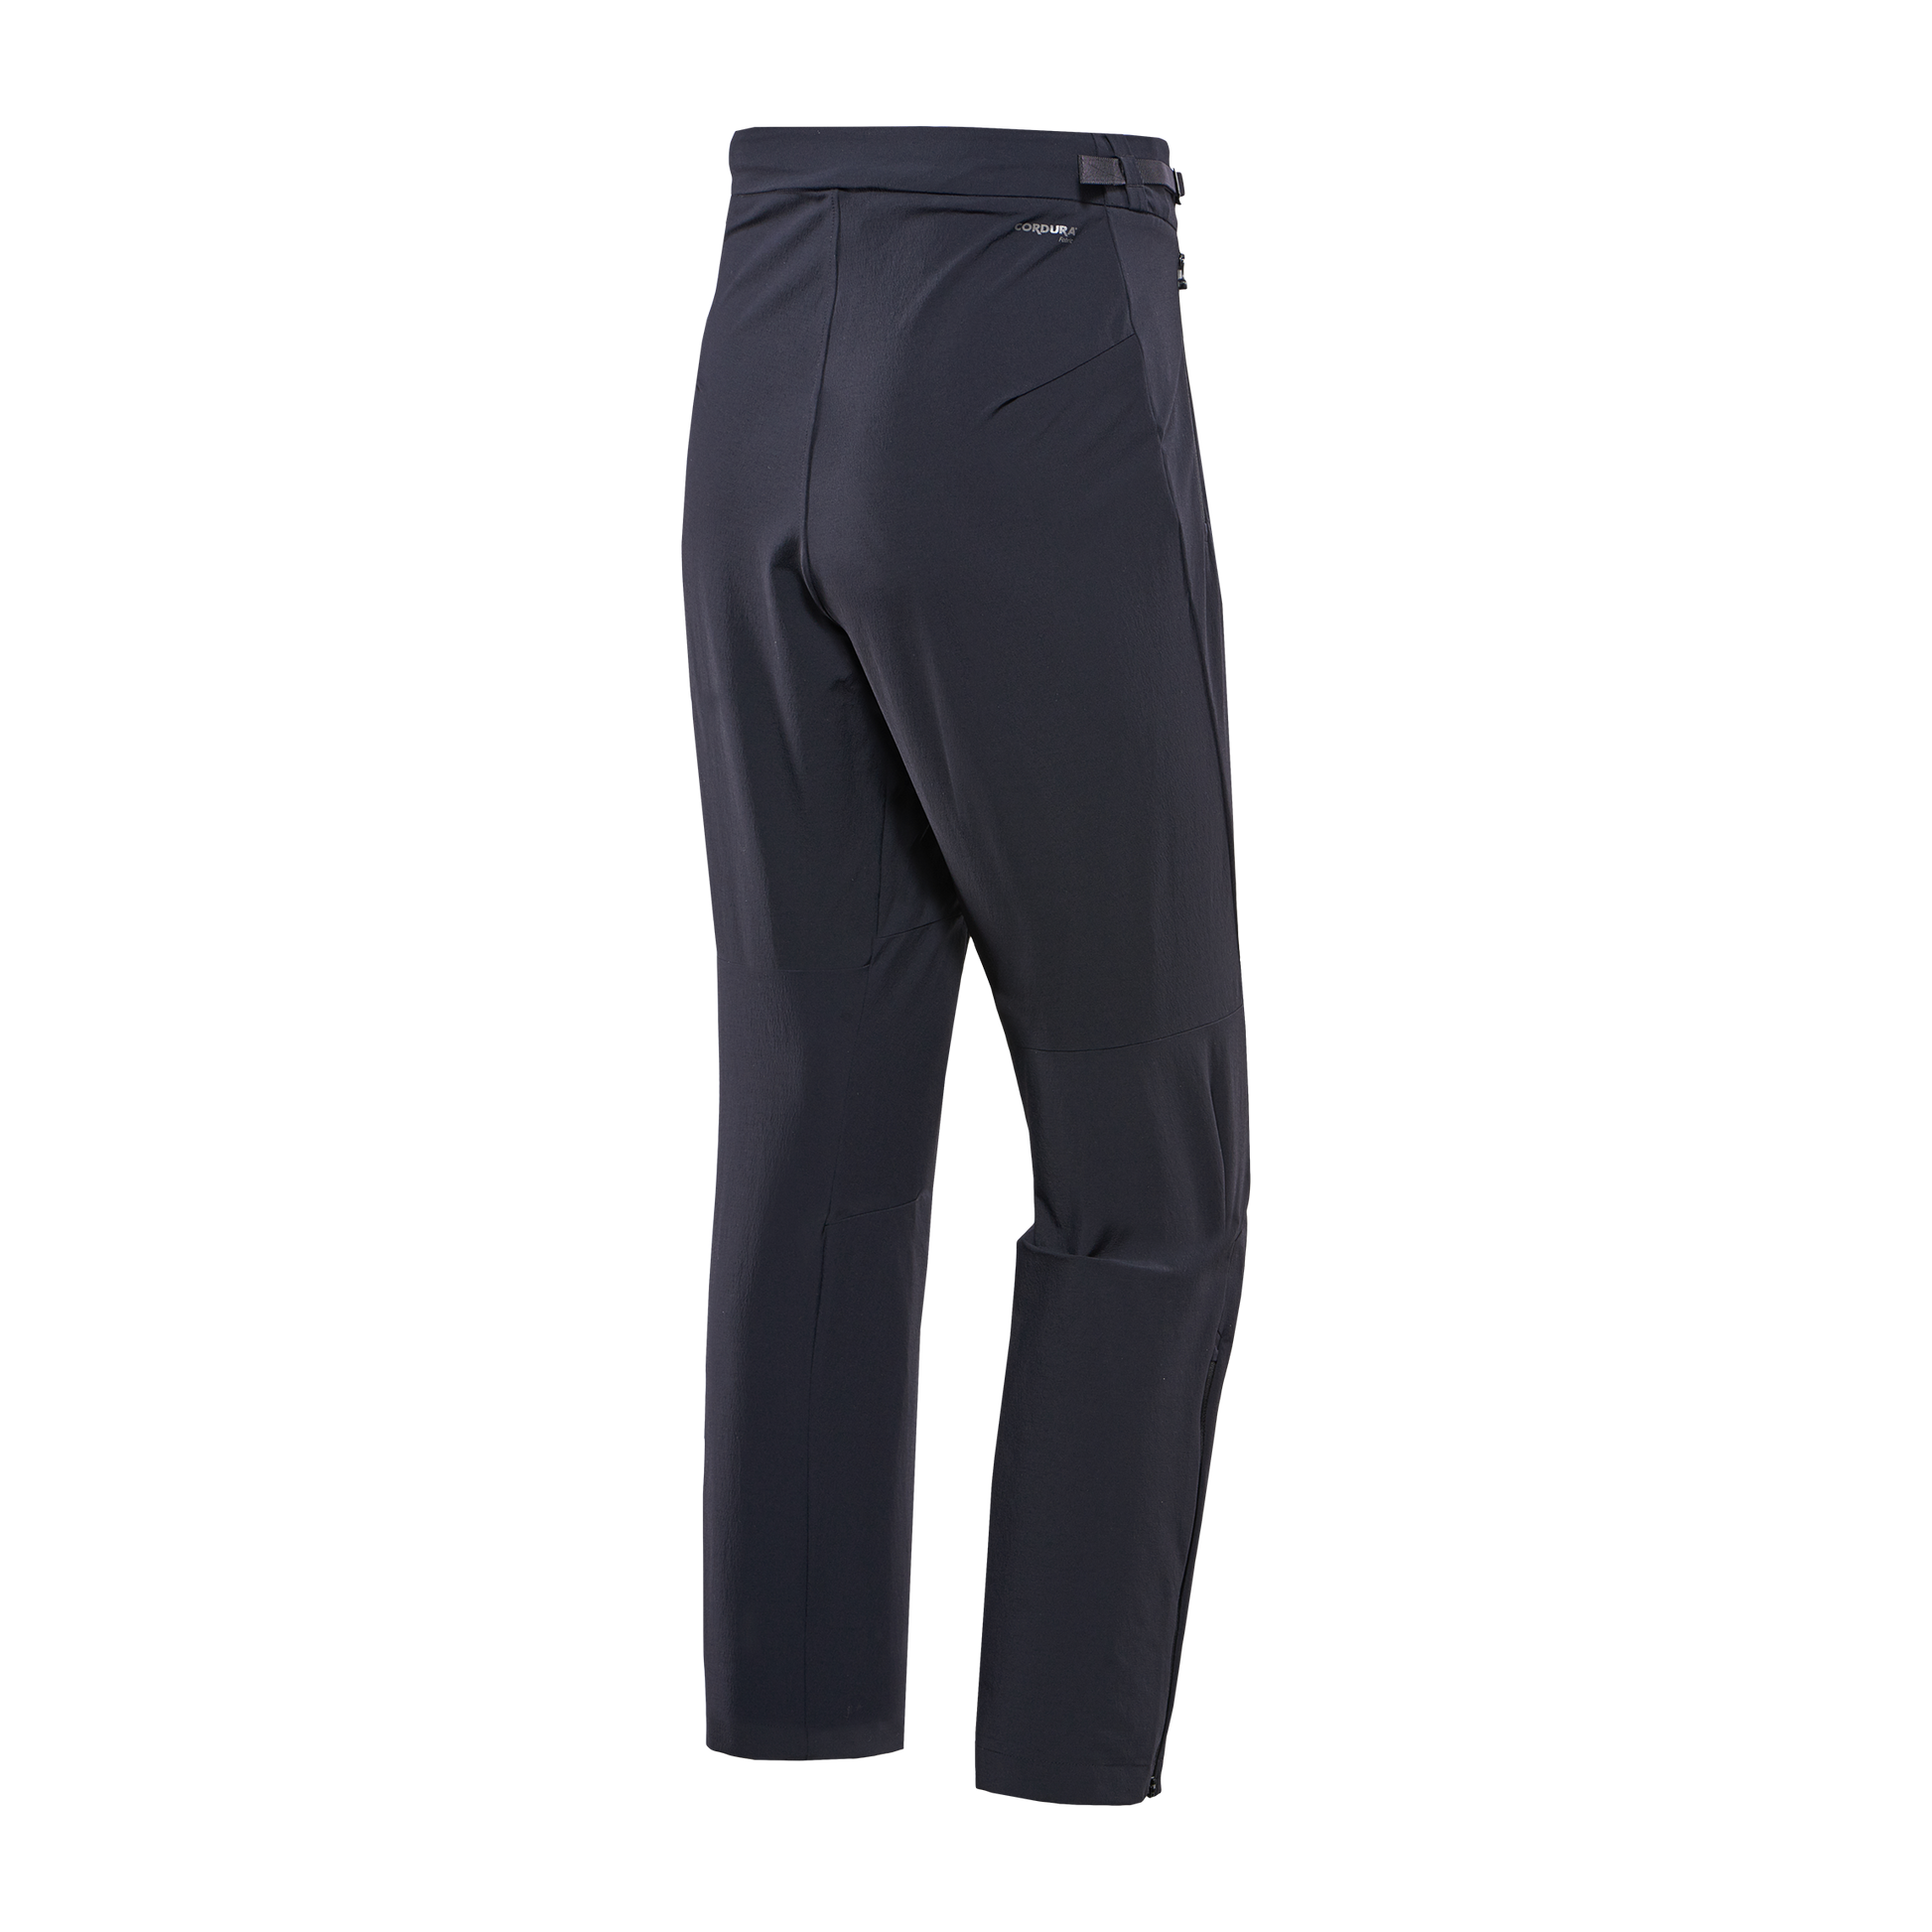 32 Degrees Pants Adult 38 x 34 Stretch Performance Gray Golf